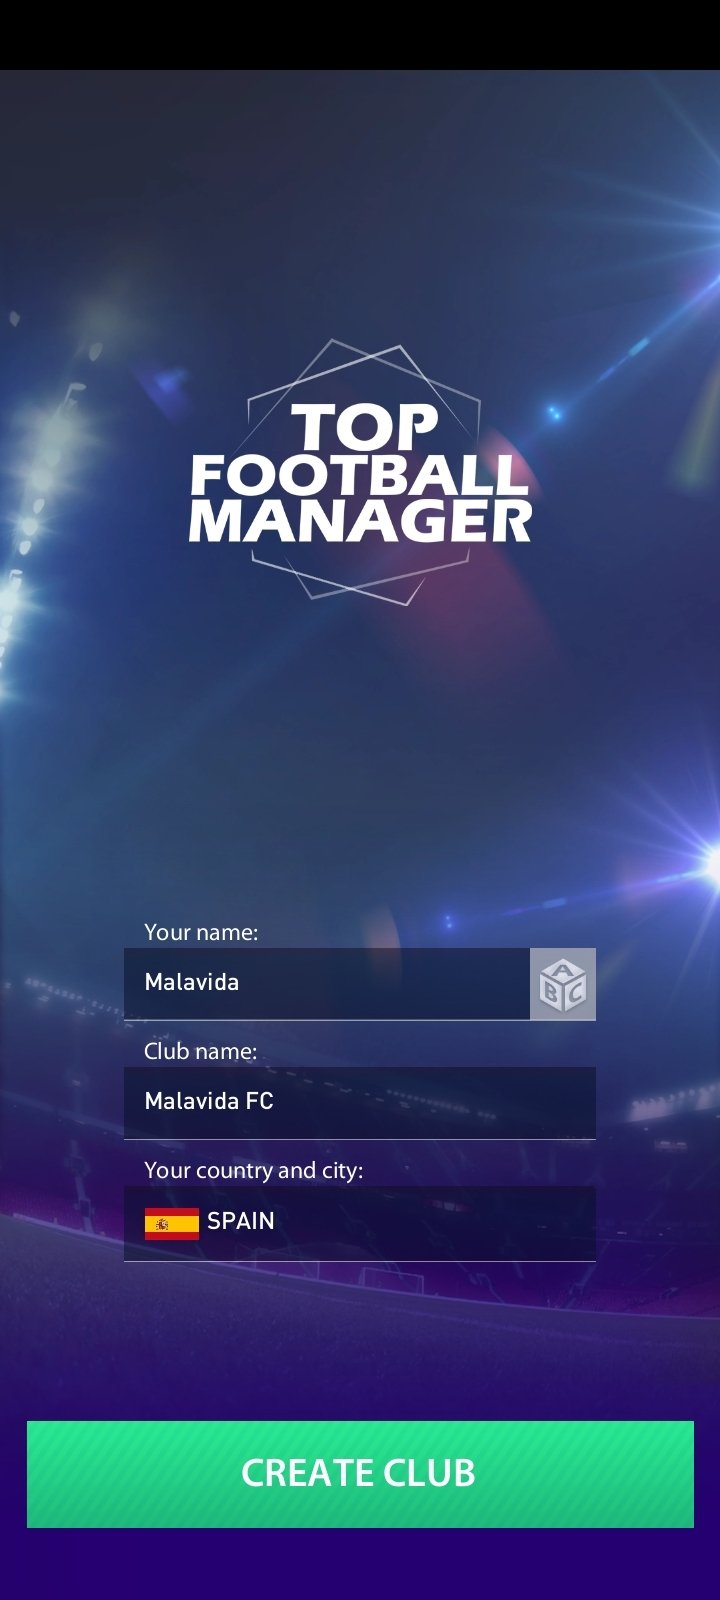 Top Football Manager 21 1 23 19 Android用ダウンロードapk無料